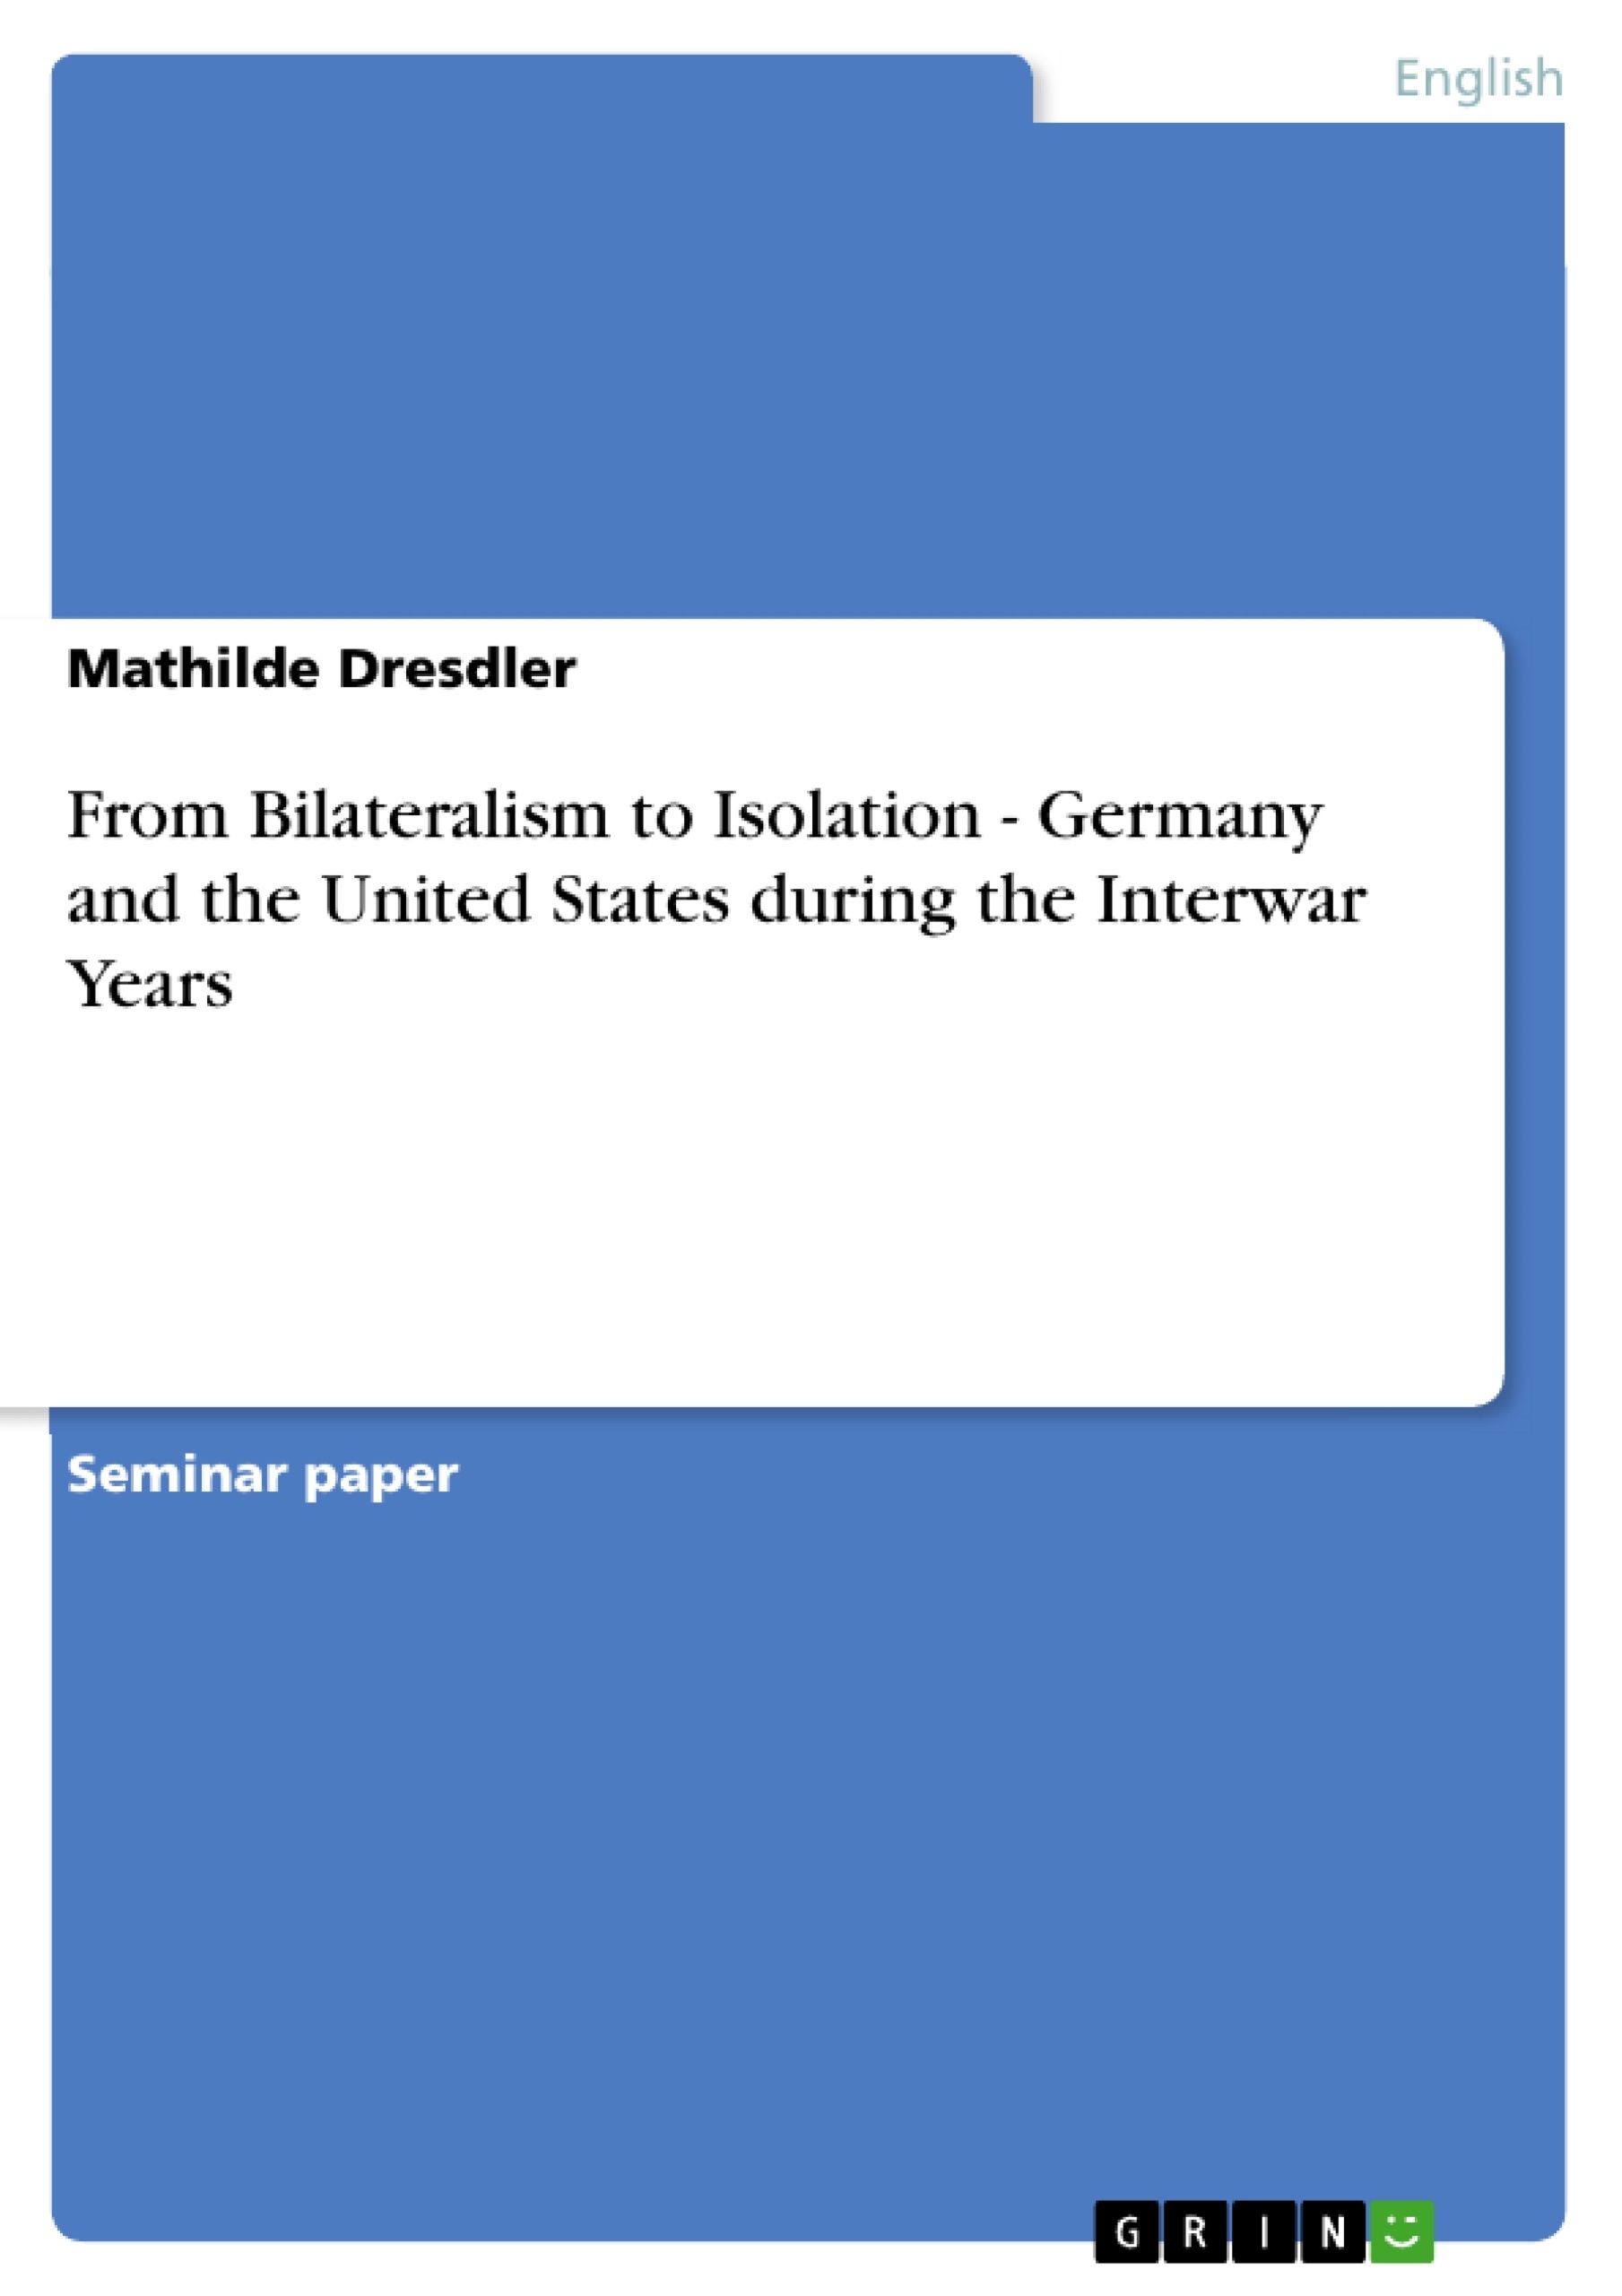 Title: From Bilateralism to Isolation - Germany and the United States during the Interwar Years